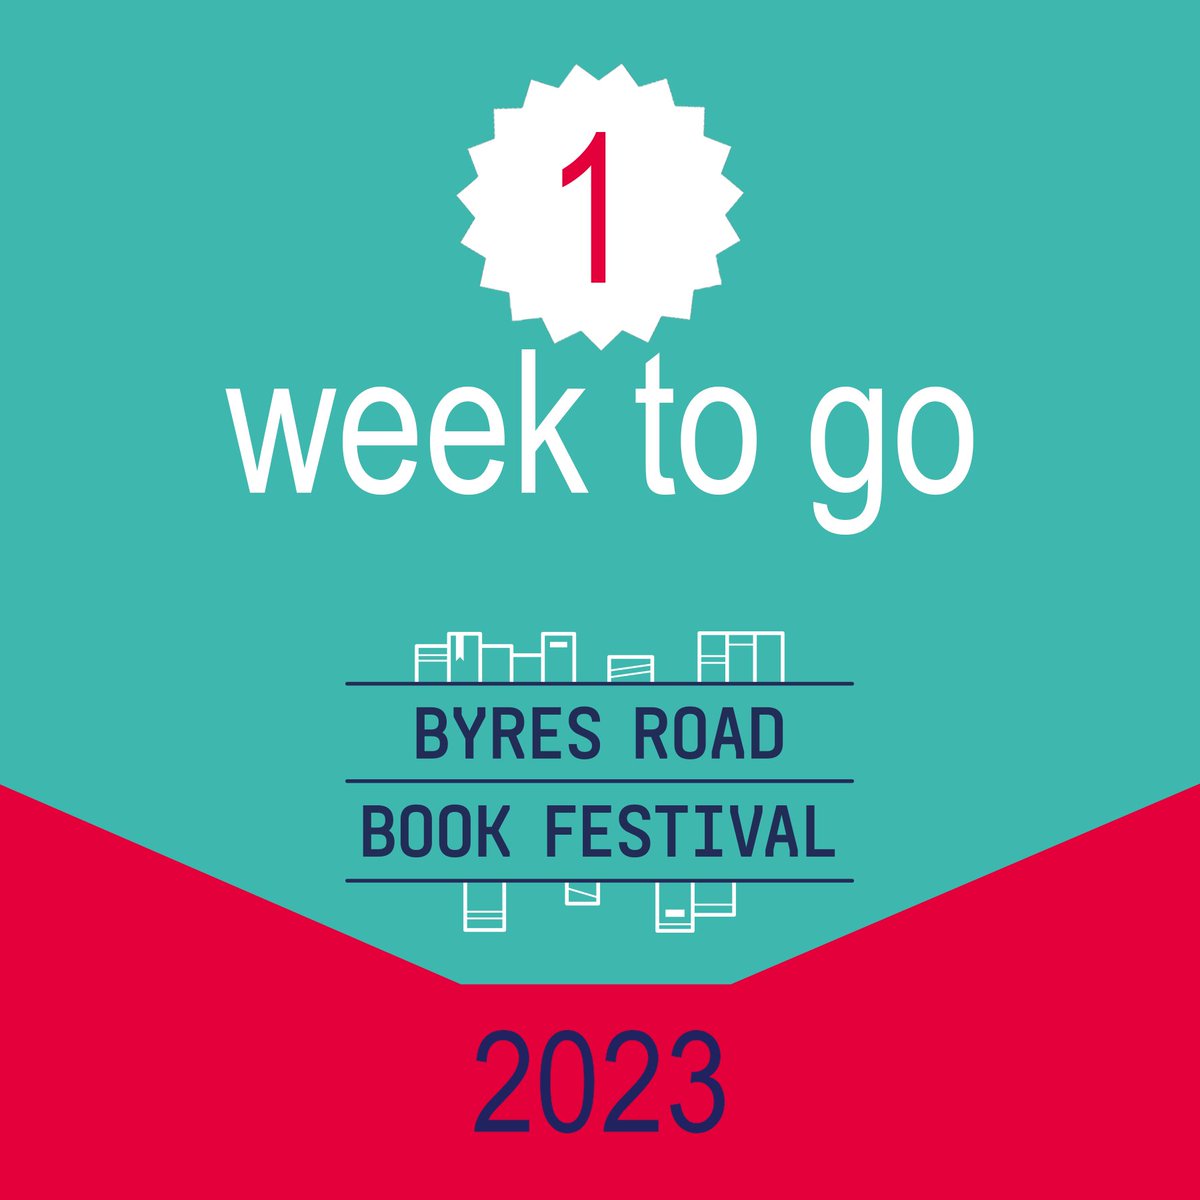 🎈
1 week until Sally Magnusson (@sallymag1) kicks of the Byres Road Book Festival 2023 at Hillhead Library.

Many events have sold out, however there are still a few tickets remaining. All events are FREE, grab those tickets before they're gone!

📚

#byresroadbookfest